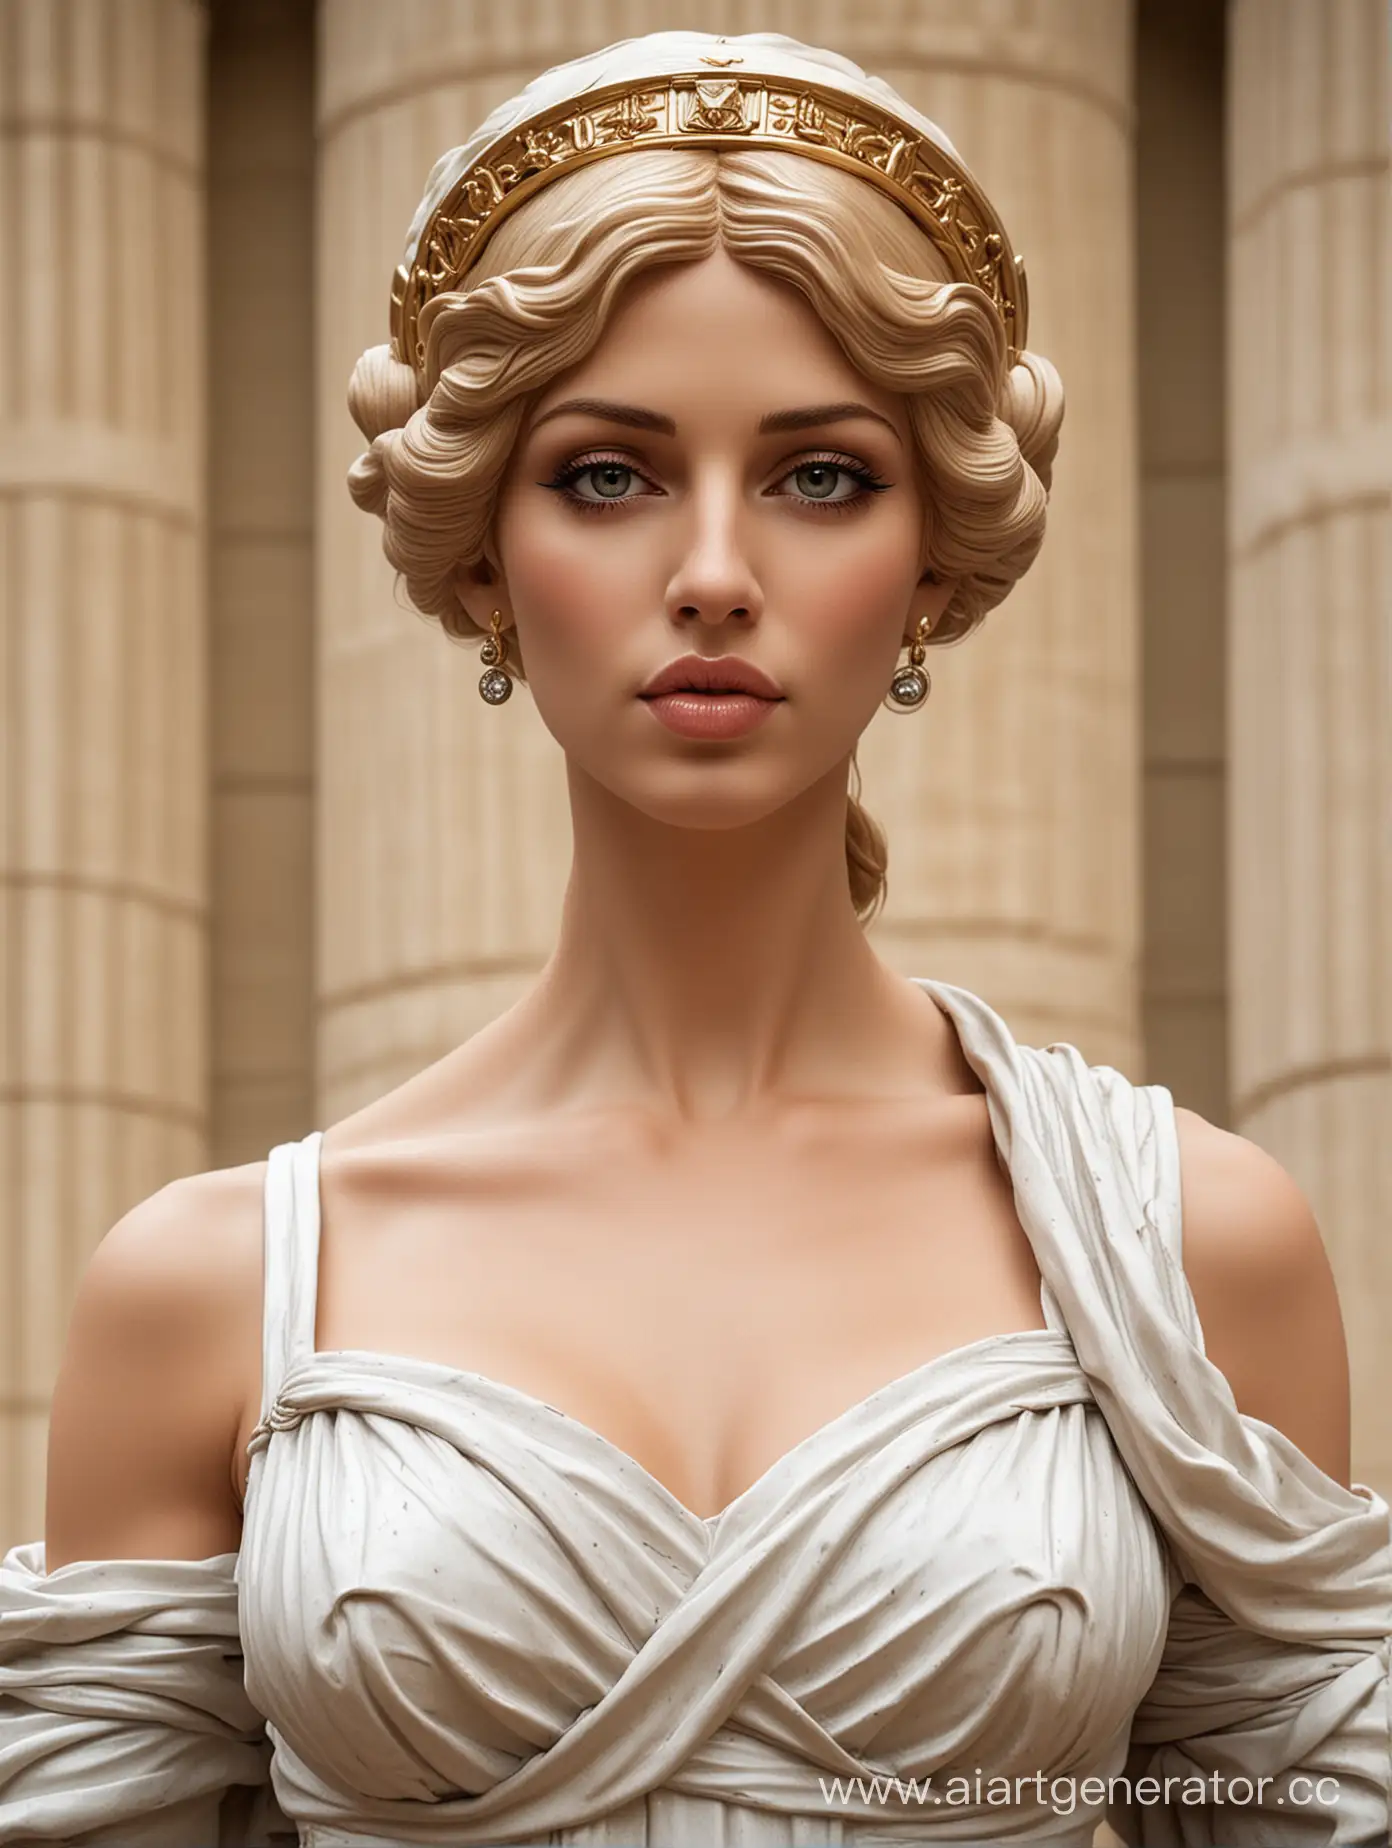 Themis-Goddess-of-Justice-with-Enhanced-Lips-and-Prominent-Bosom